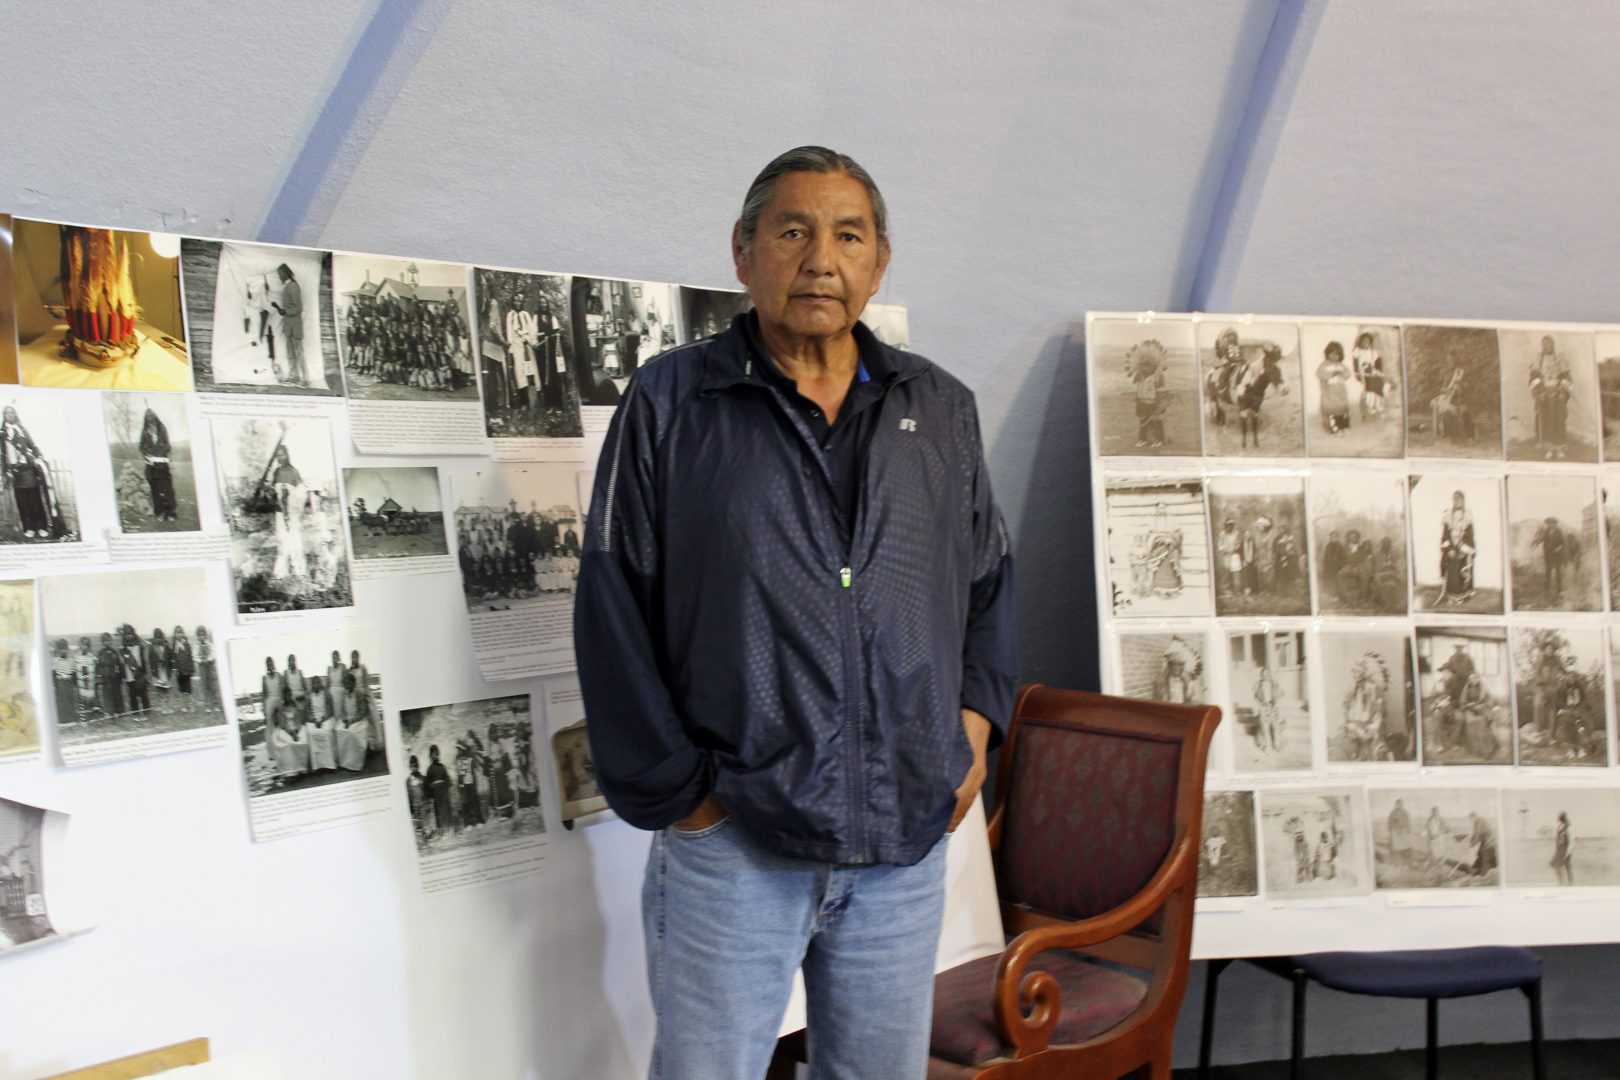 In this May 6, 2016, photo, Russell Eagle Bear, the historic preservation officer for the Rosebud Sioux Tribe, stands in his office in in Rosebud, S.D. Eagle Bear led a meeting between leaders of several tribes, including the Rosebud Sioux Tribe, and representatives from the U.S. Army to address the possibility of repatriating the remains of at least 10 Native American children who died away from their homes while being forced to attend the government-run Carlisle Indian Industrial School in Pennsylvania more than a century ago. 